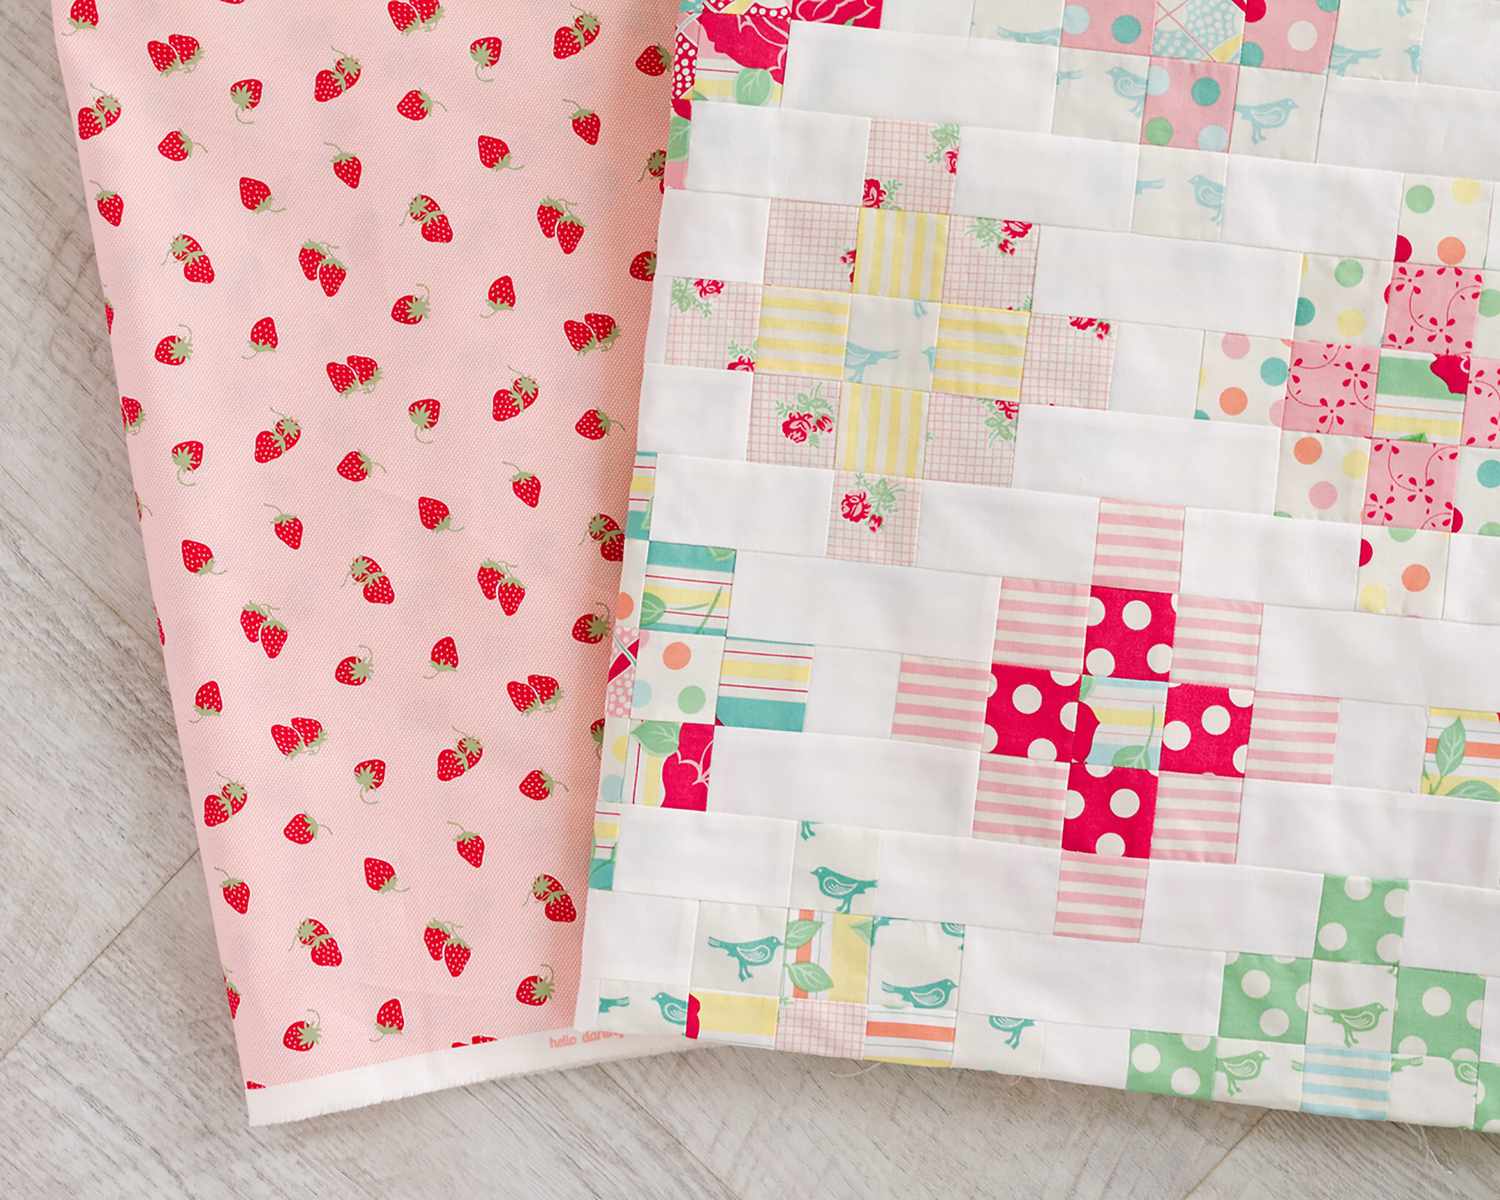 Easy Quilt Patterns For Beginners: Step-by-Step Guide